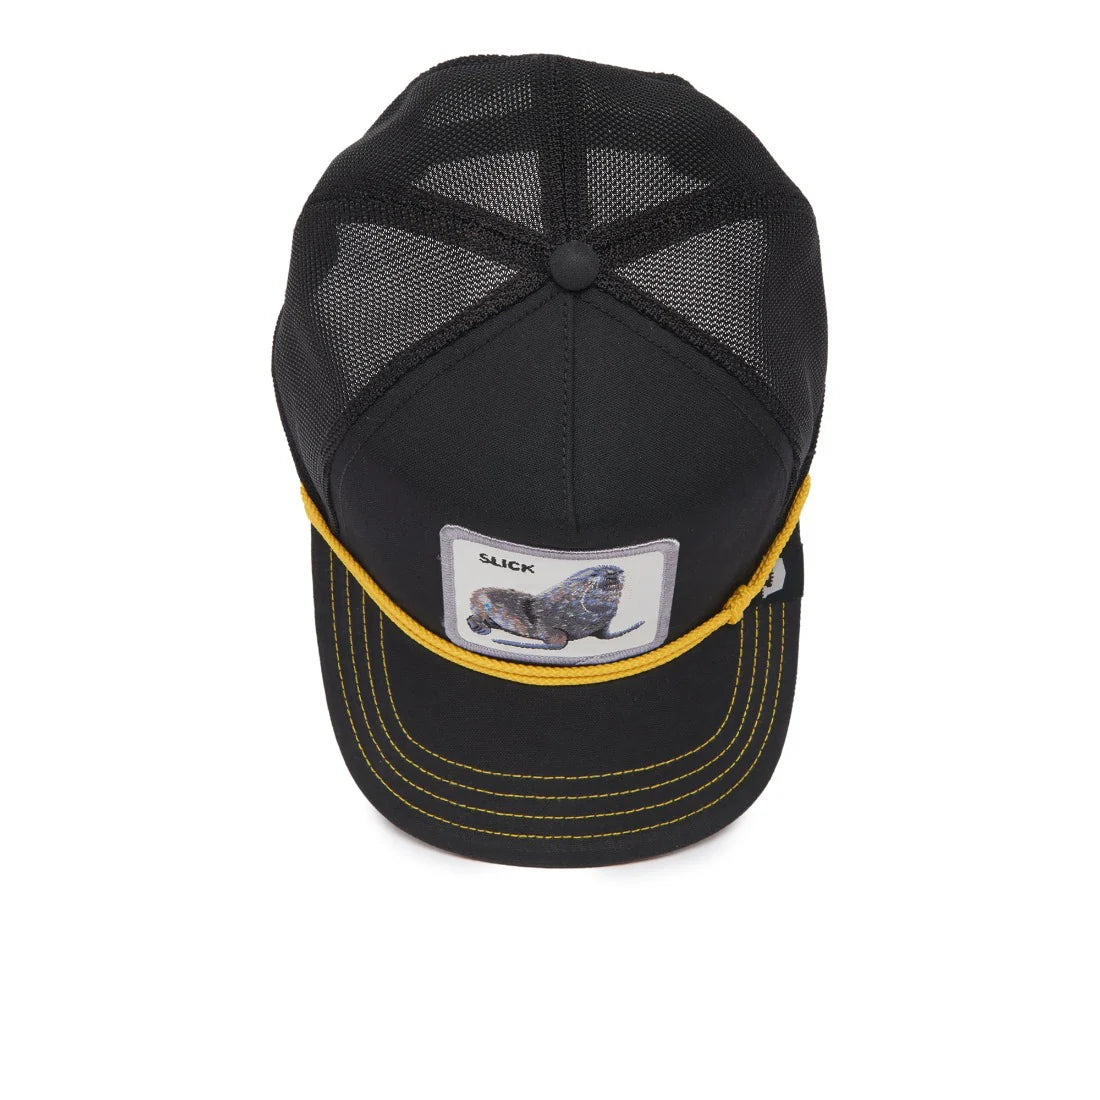 'Goorin Bros. Seal of Approval Trucker Hat' in 'Black' colour